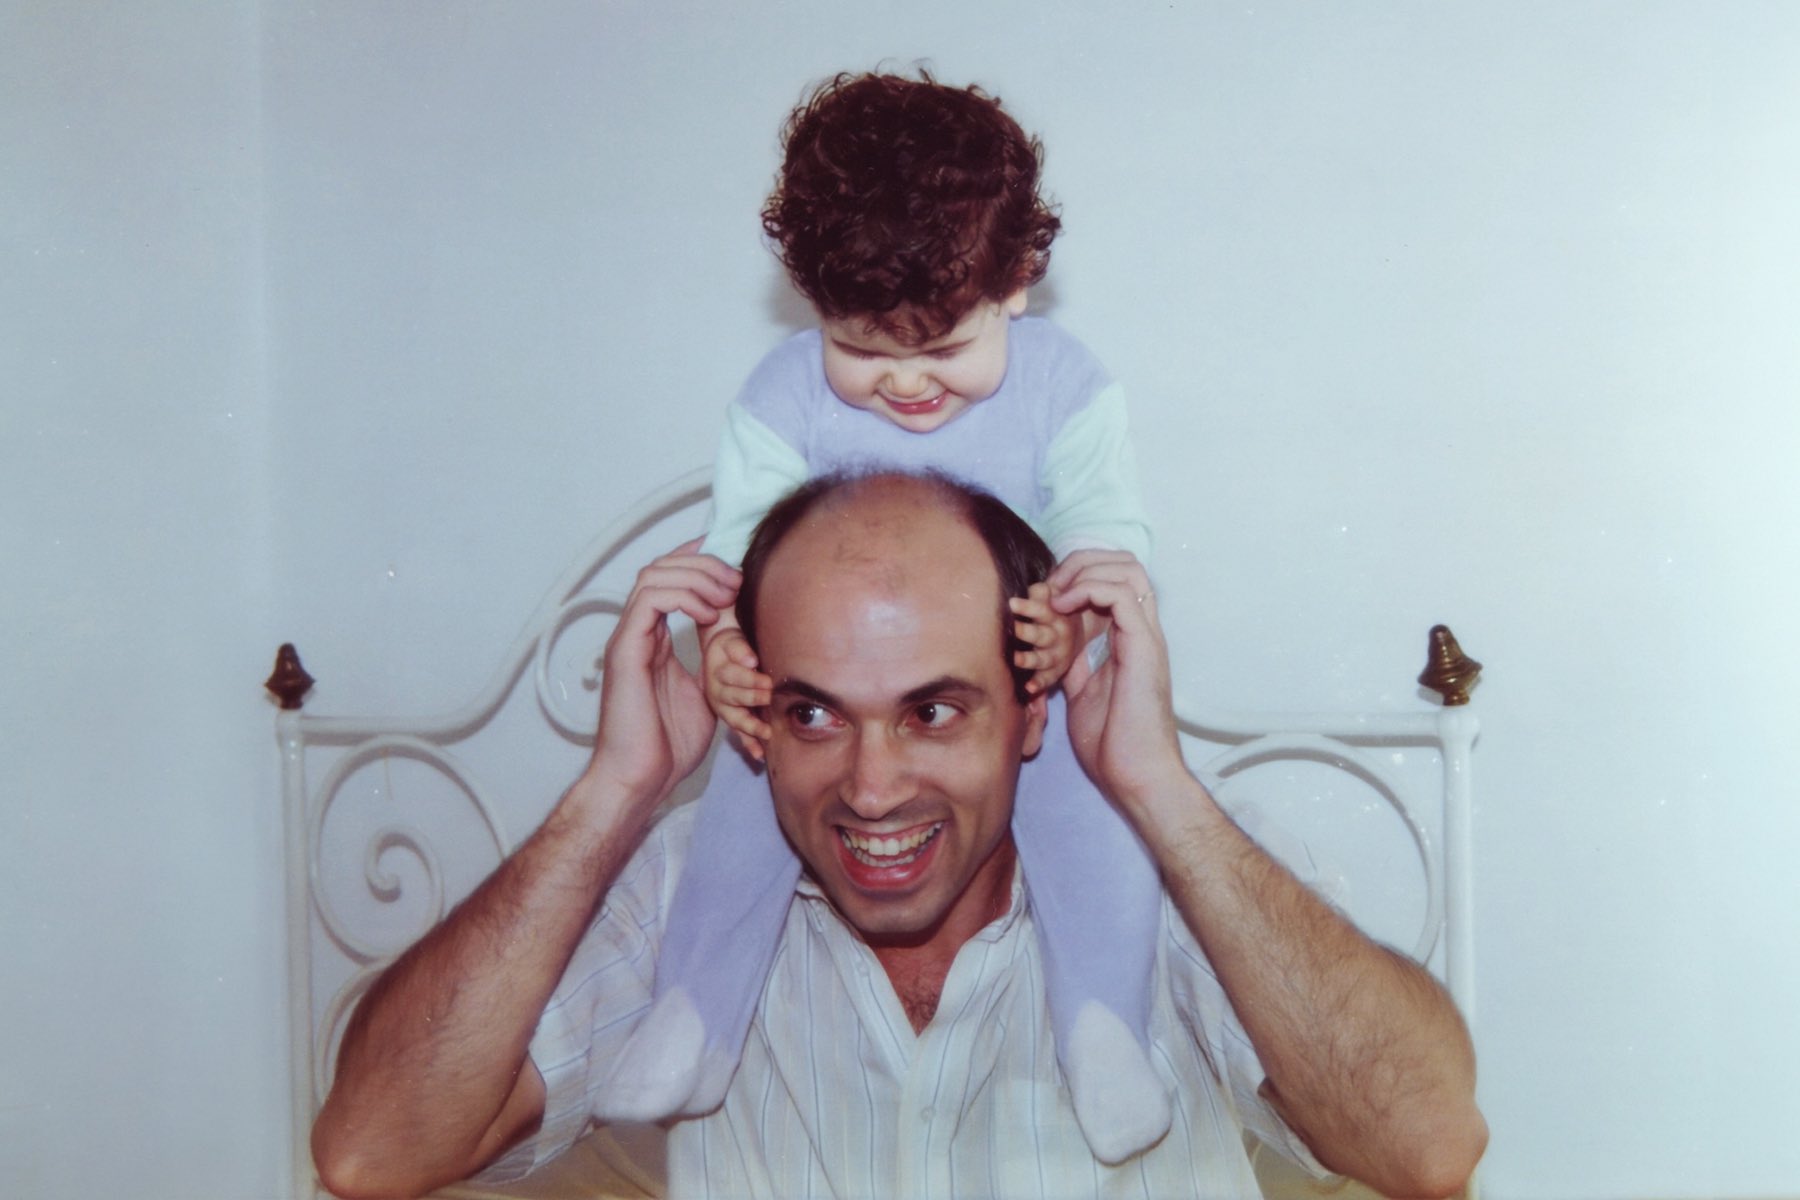 Rita playing with her dad - 1991